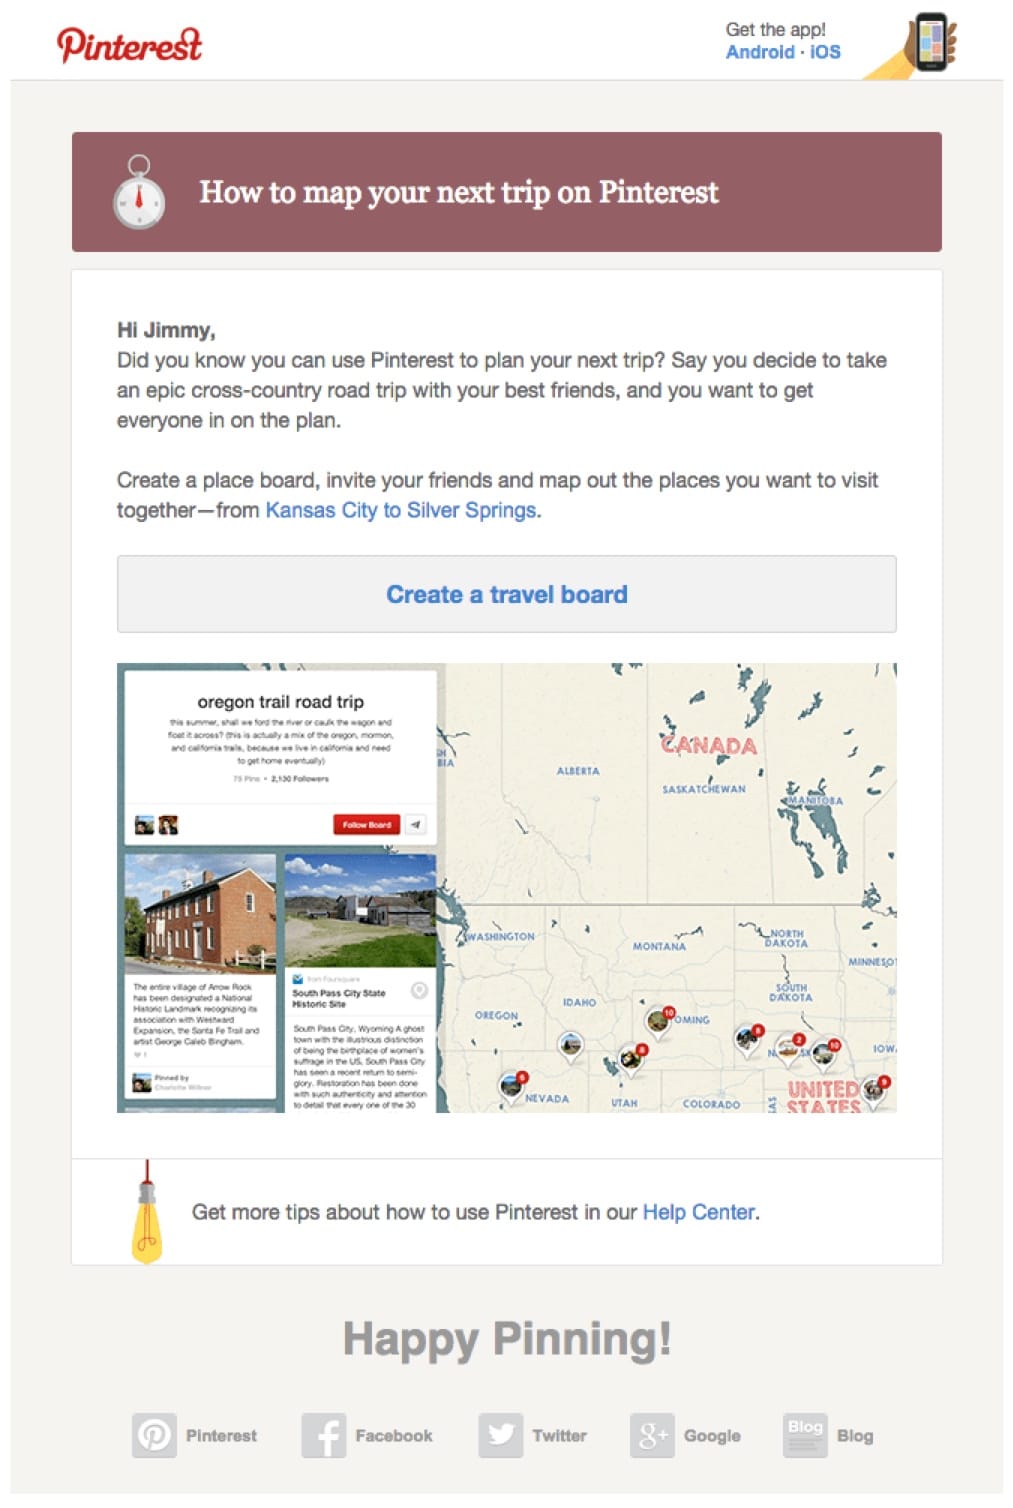 email example pinterest (did you know email)